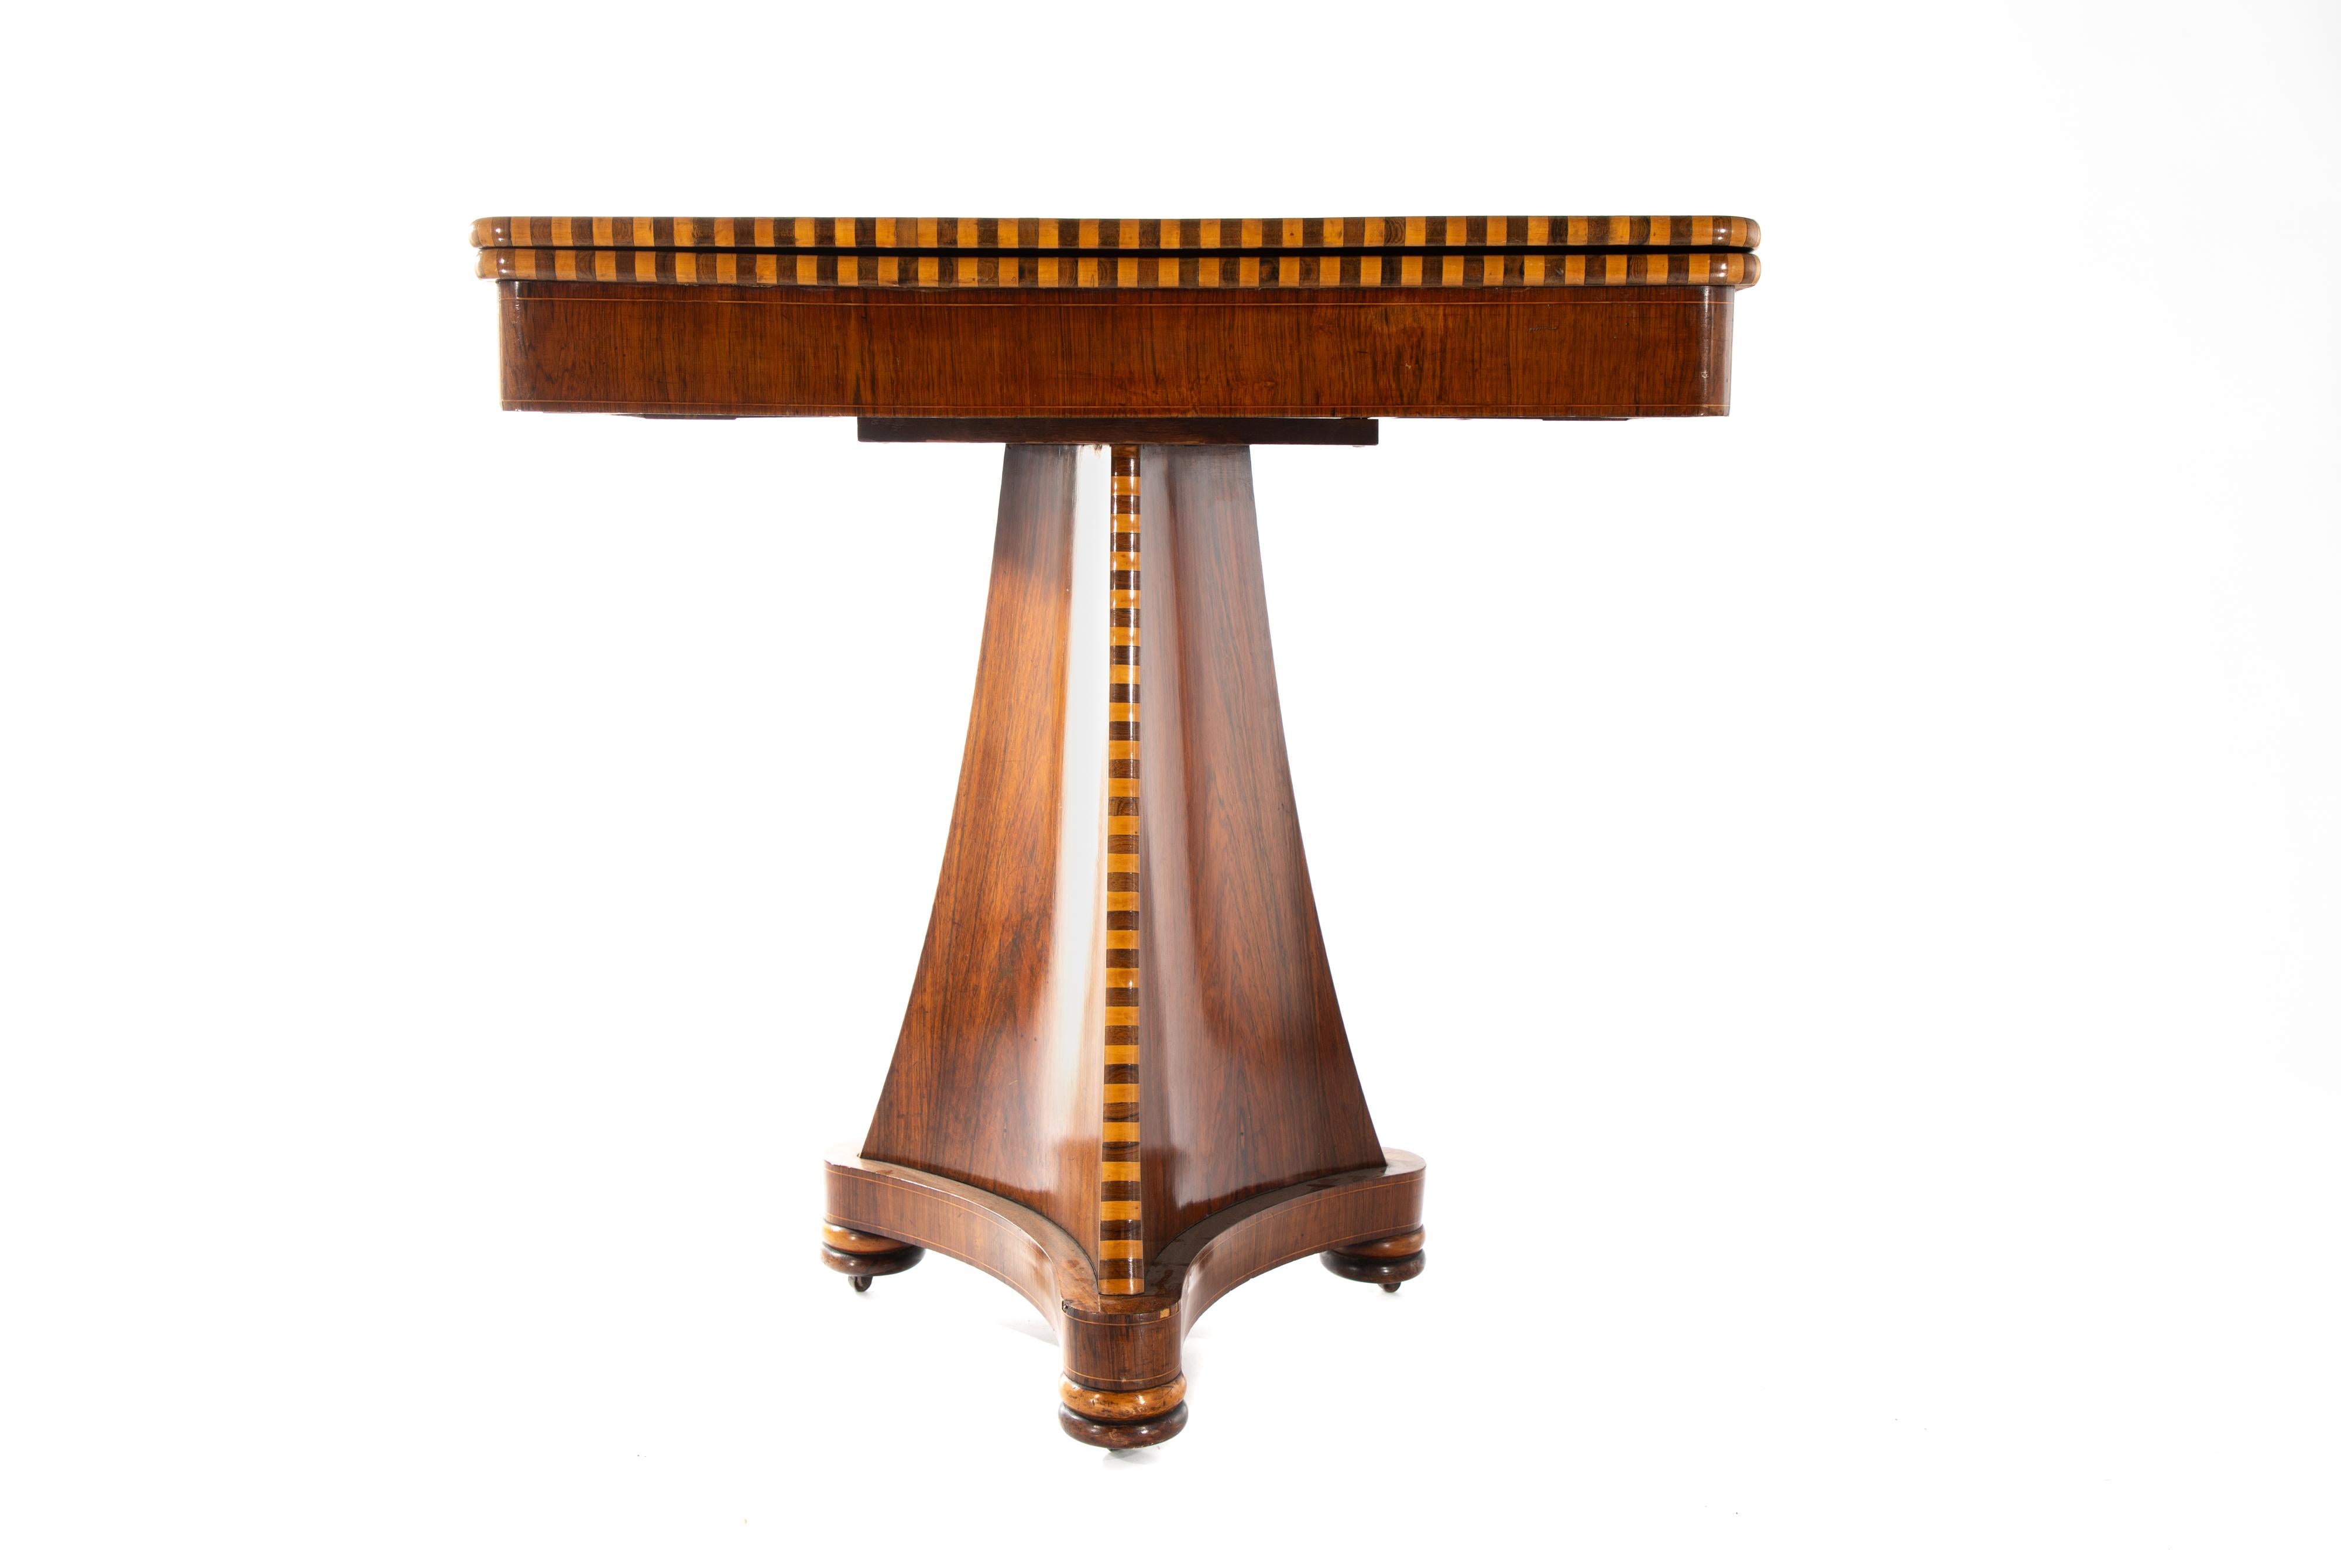 19th century Italian Empire style game table.  
Rosewood and boxwood veneers, marquetry sunburst in center of table and striping along three exposed edges.  
Opens to expose a circular gaming surface of leather with gilt embossing.
On a triangular